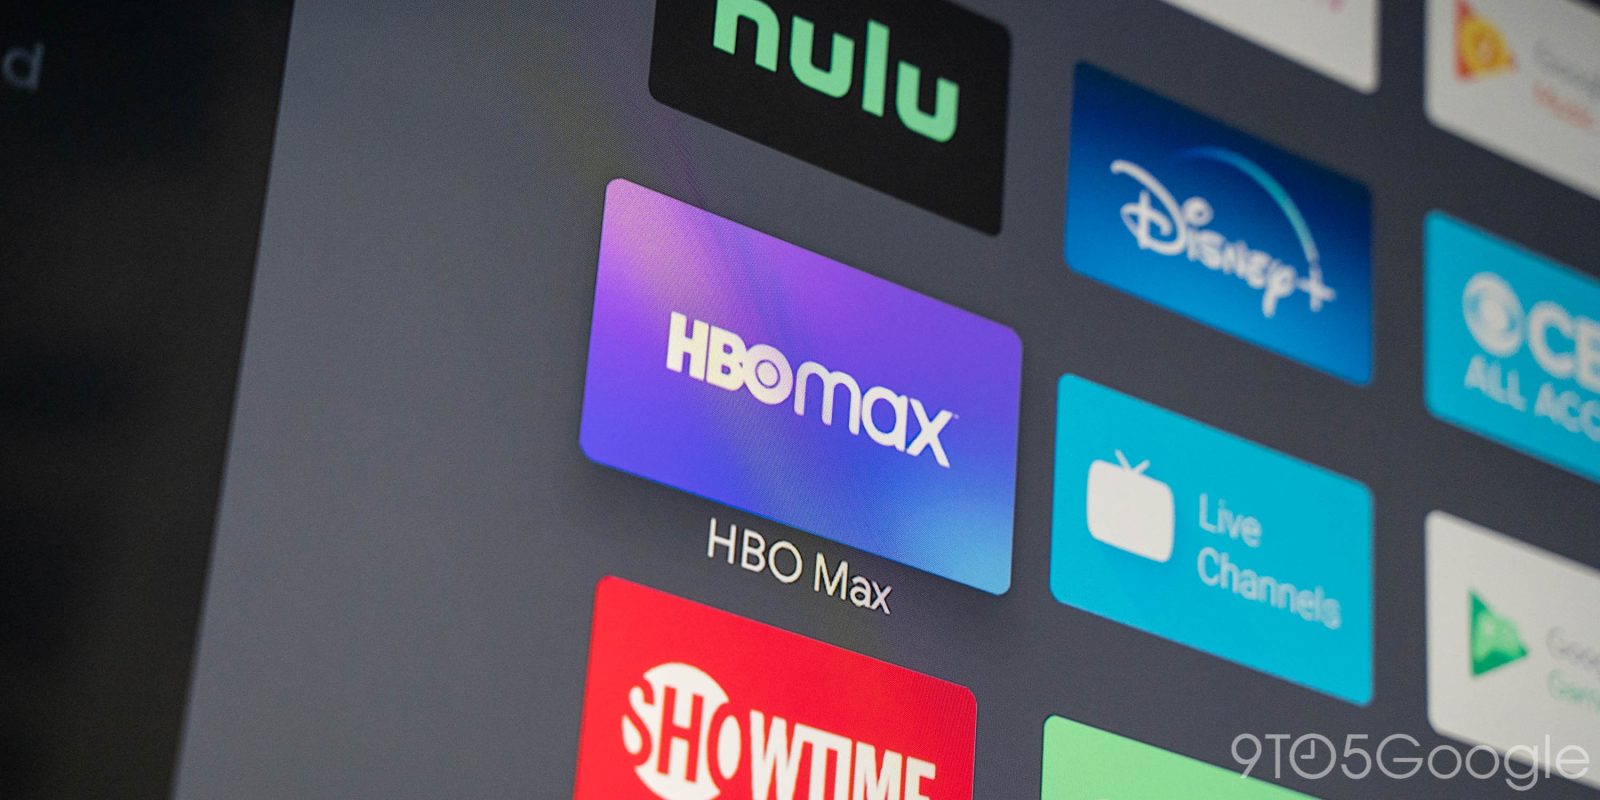 hbo max android tv